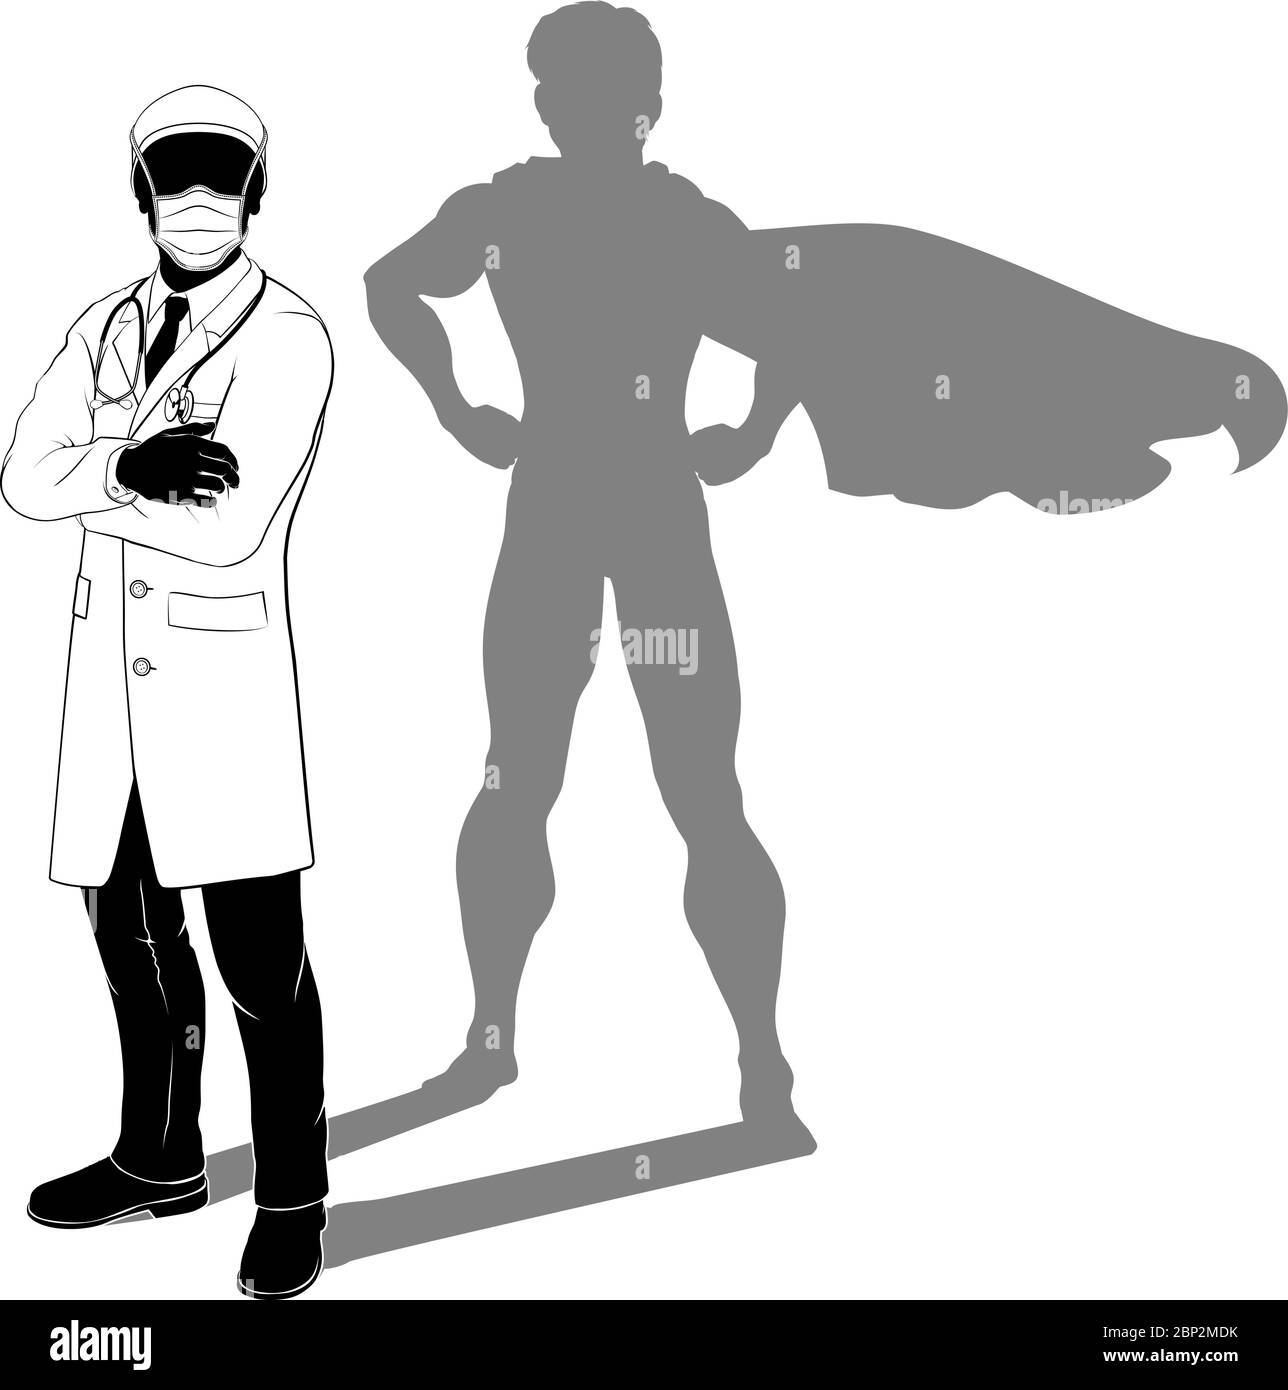 Doctor PPE Mask Silhouette Super Hero Shadow Stock Vector